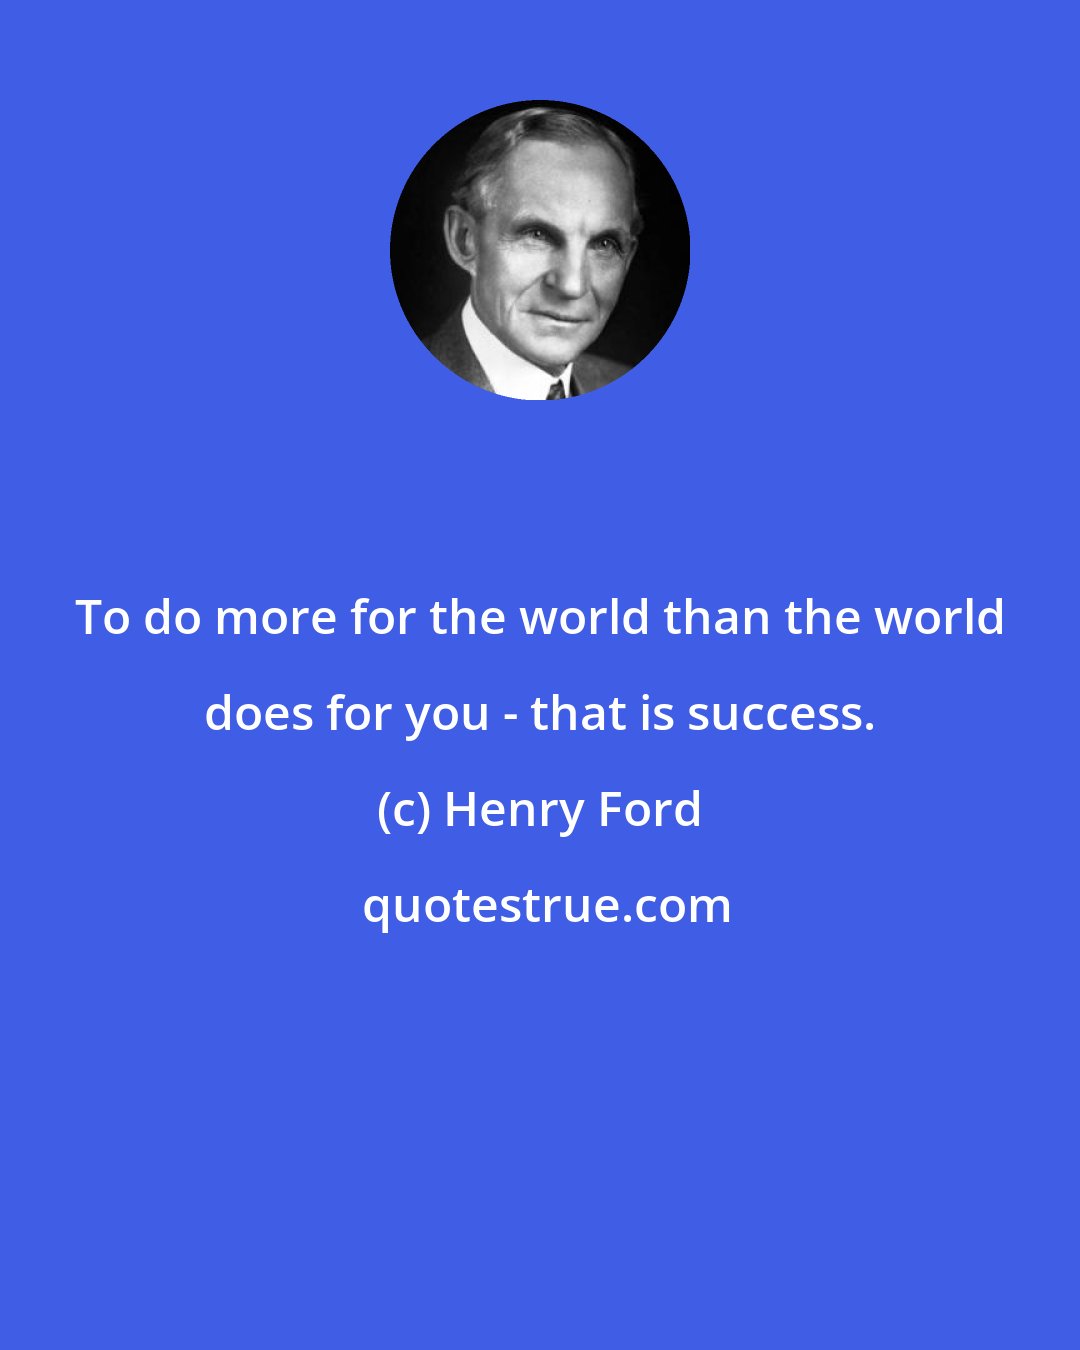 Henry Ford: To do more for the world than the world does for you - that is success.